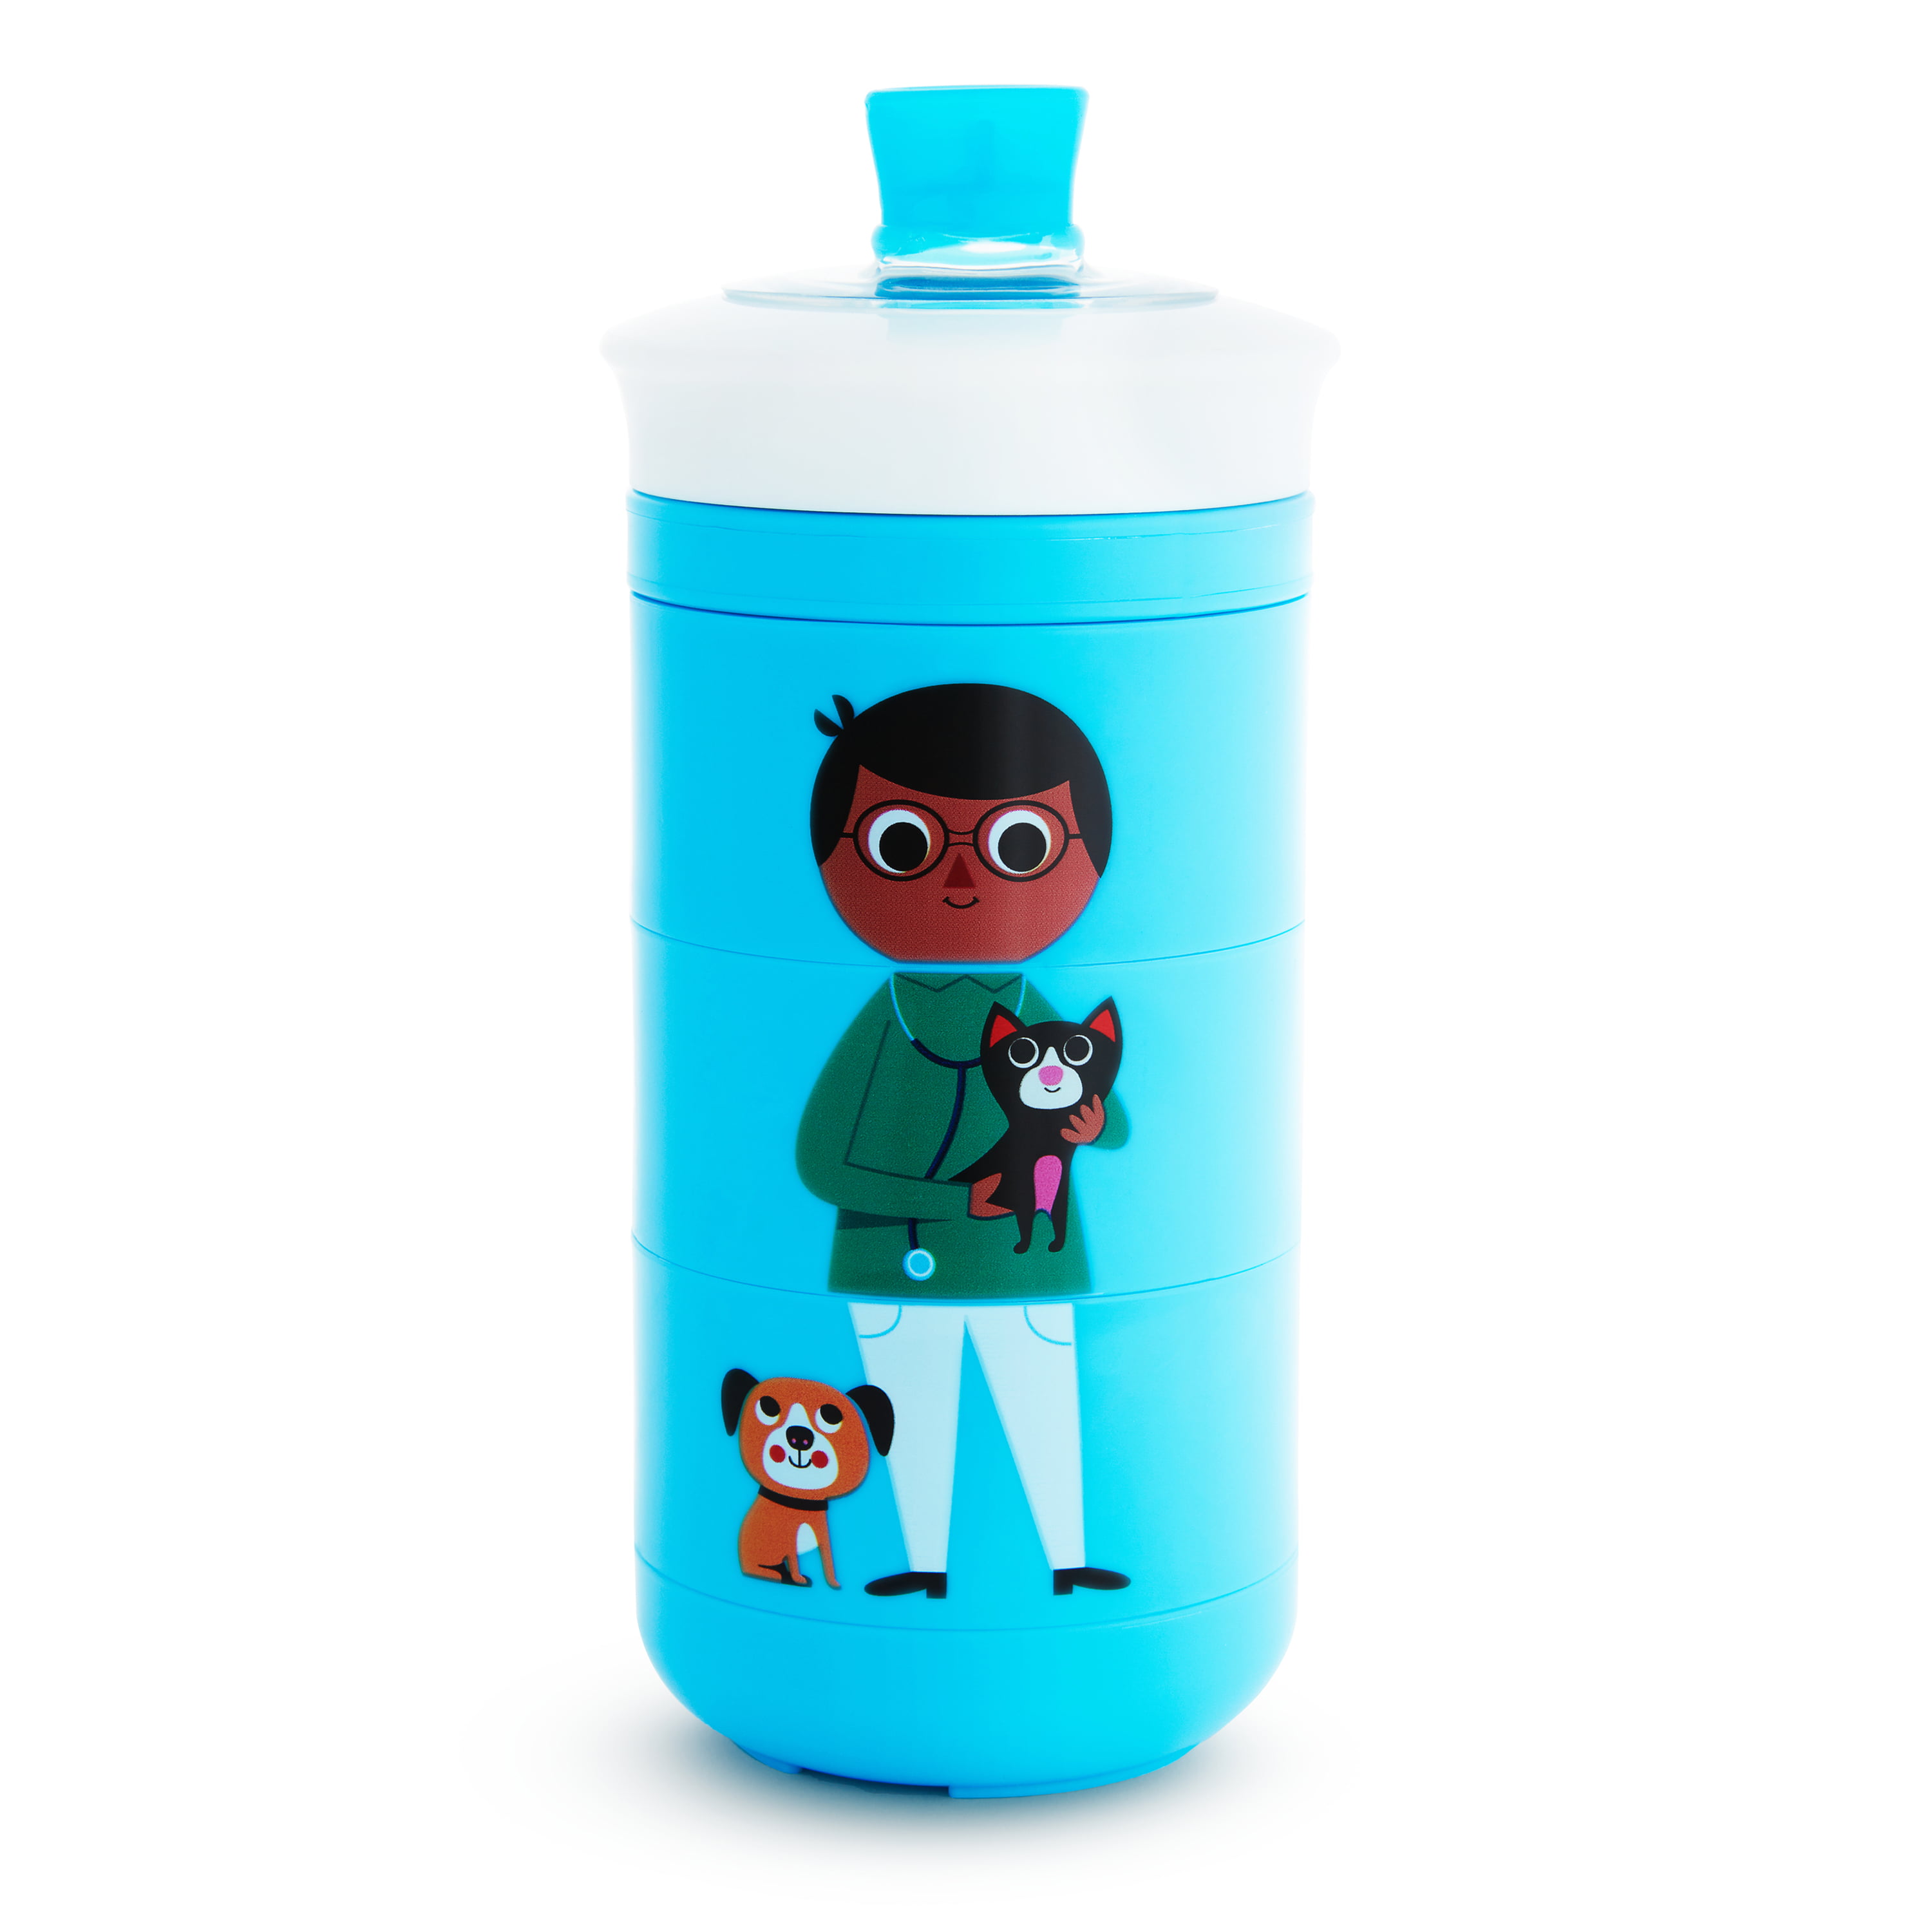 Kids Cup / Blue Dog Cup / Cold Cup / Character Cup / Blue Kids Cup / Toddler  Cup 